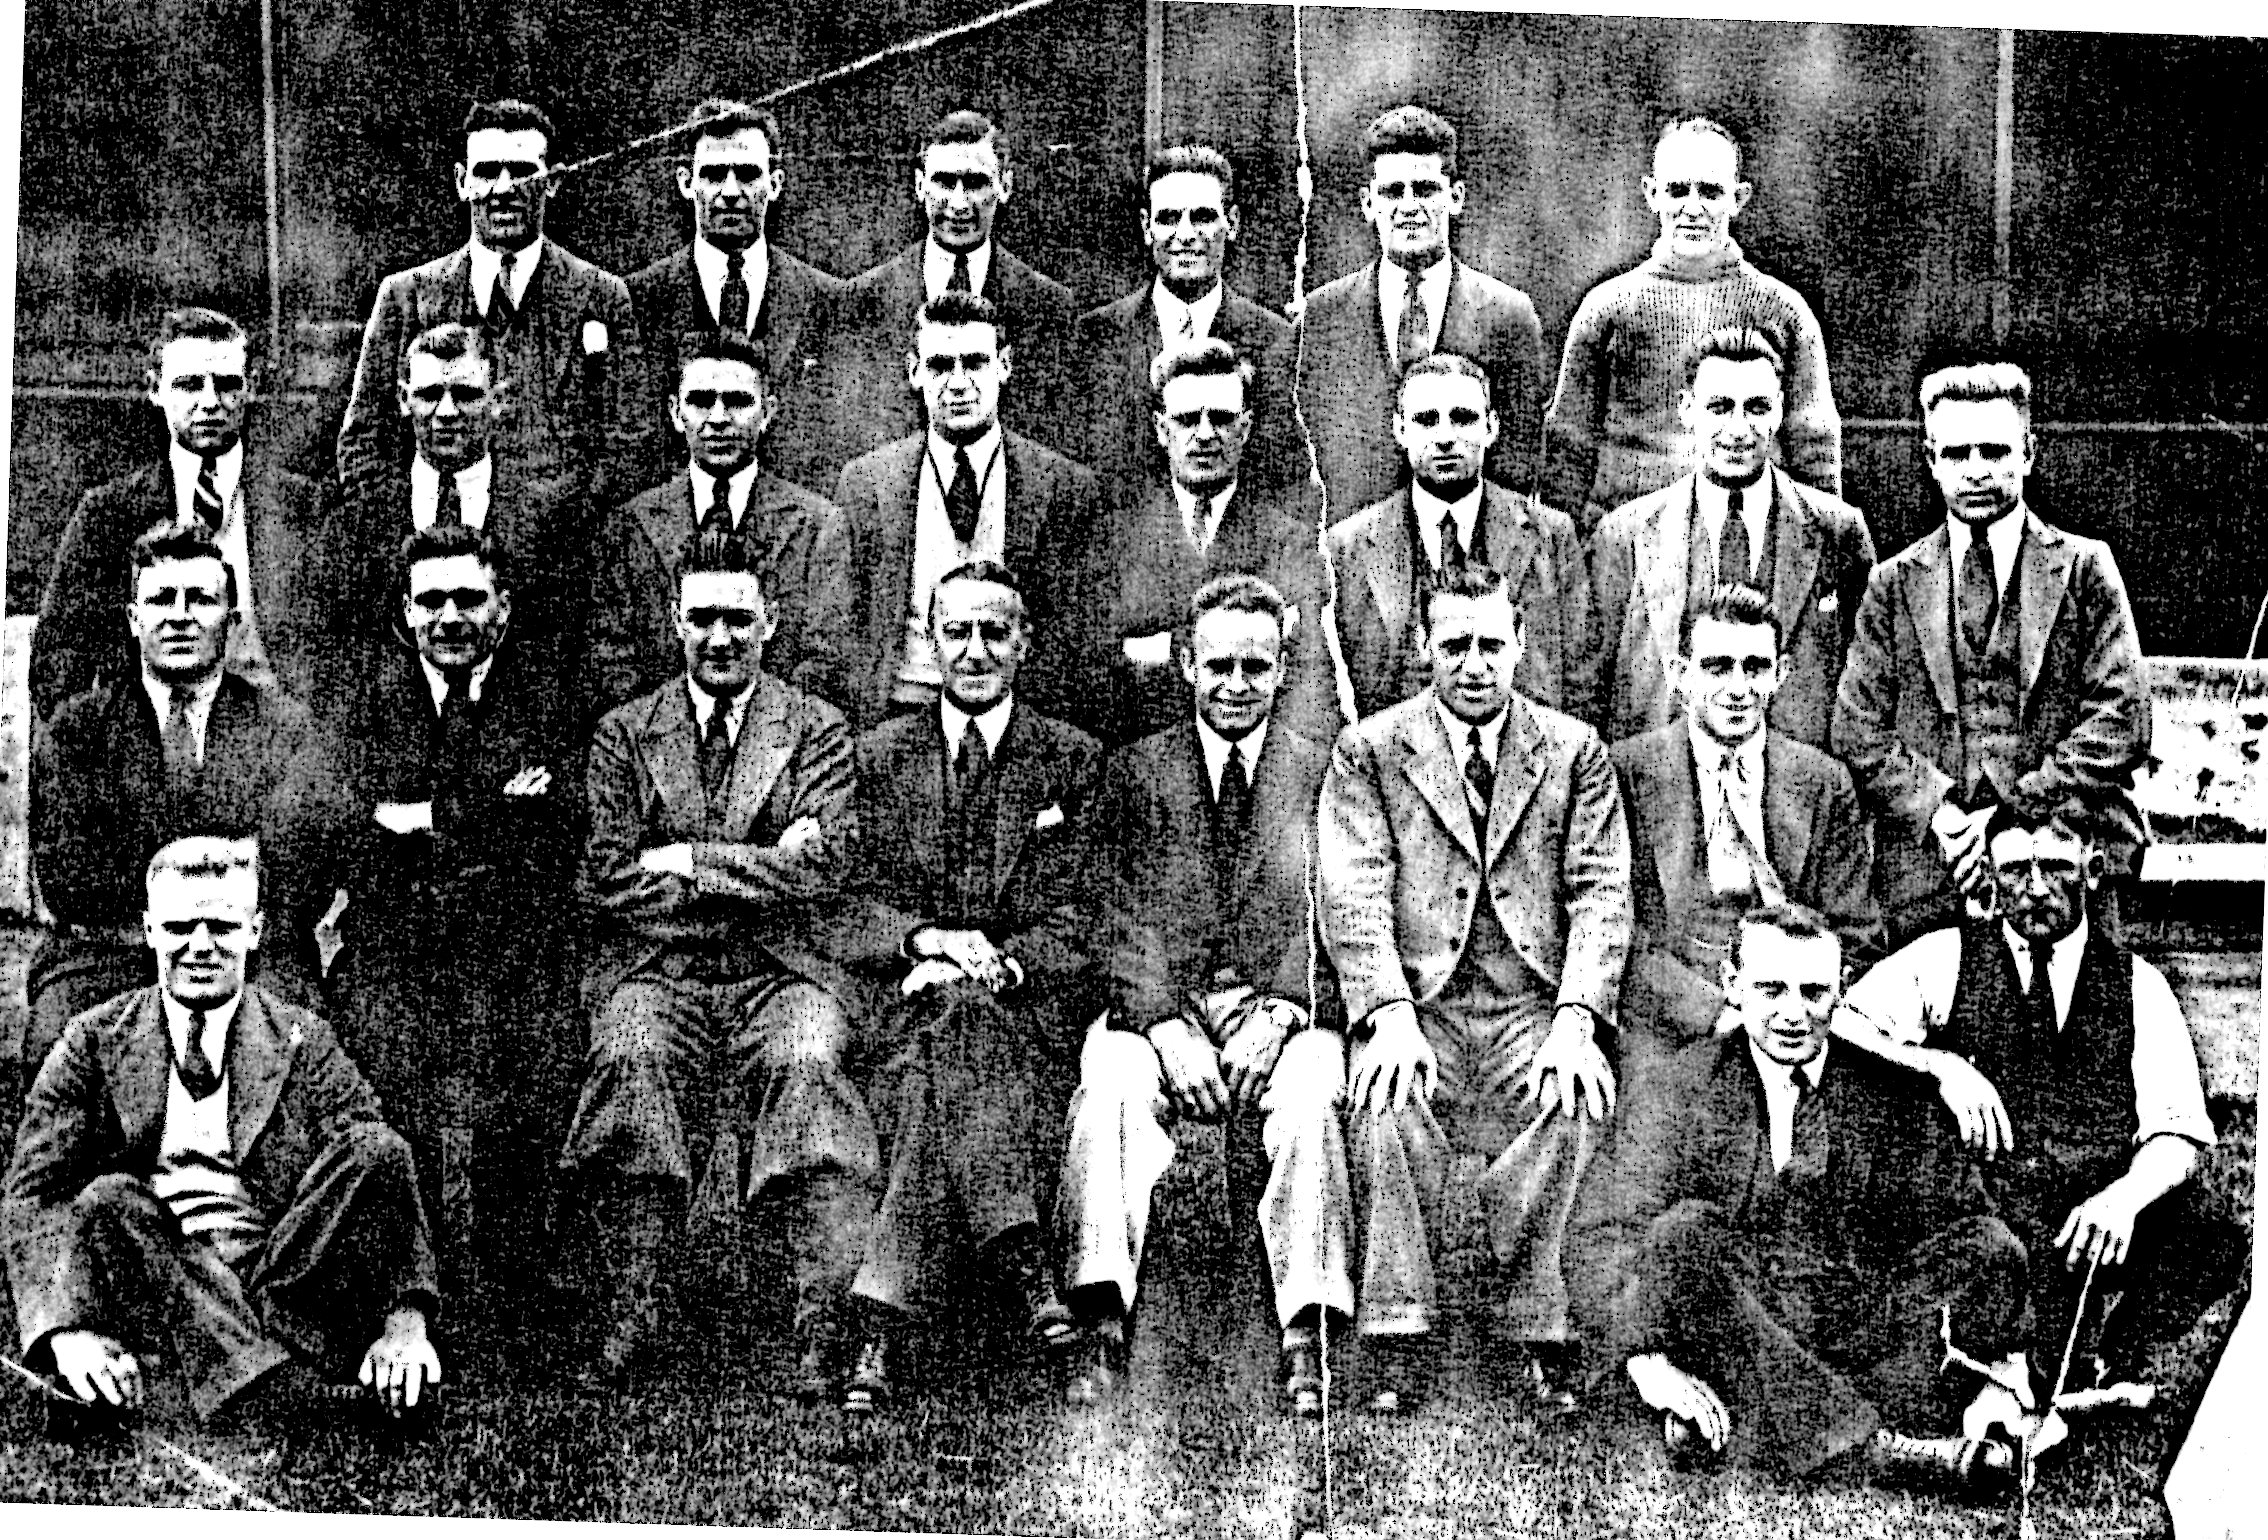 Formal Team Photo 1931/32 - All in Suits